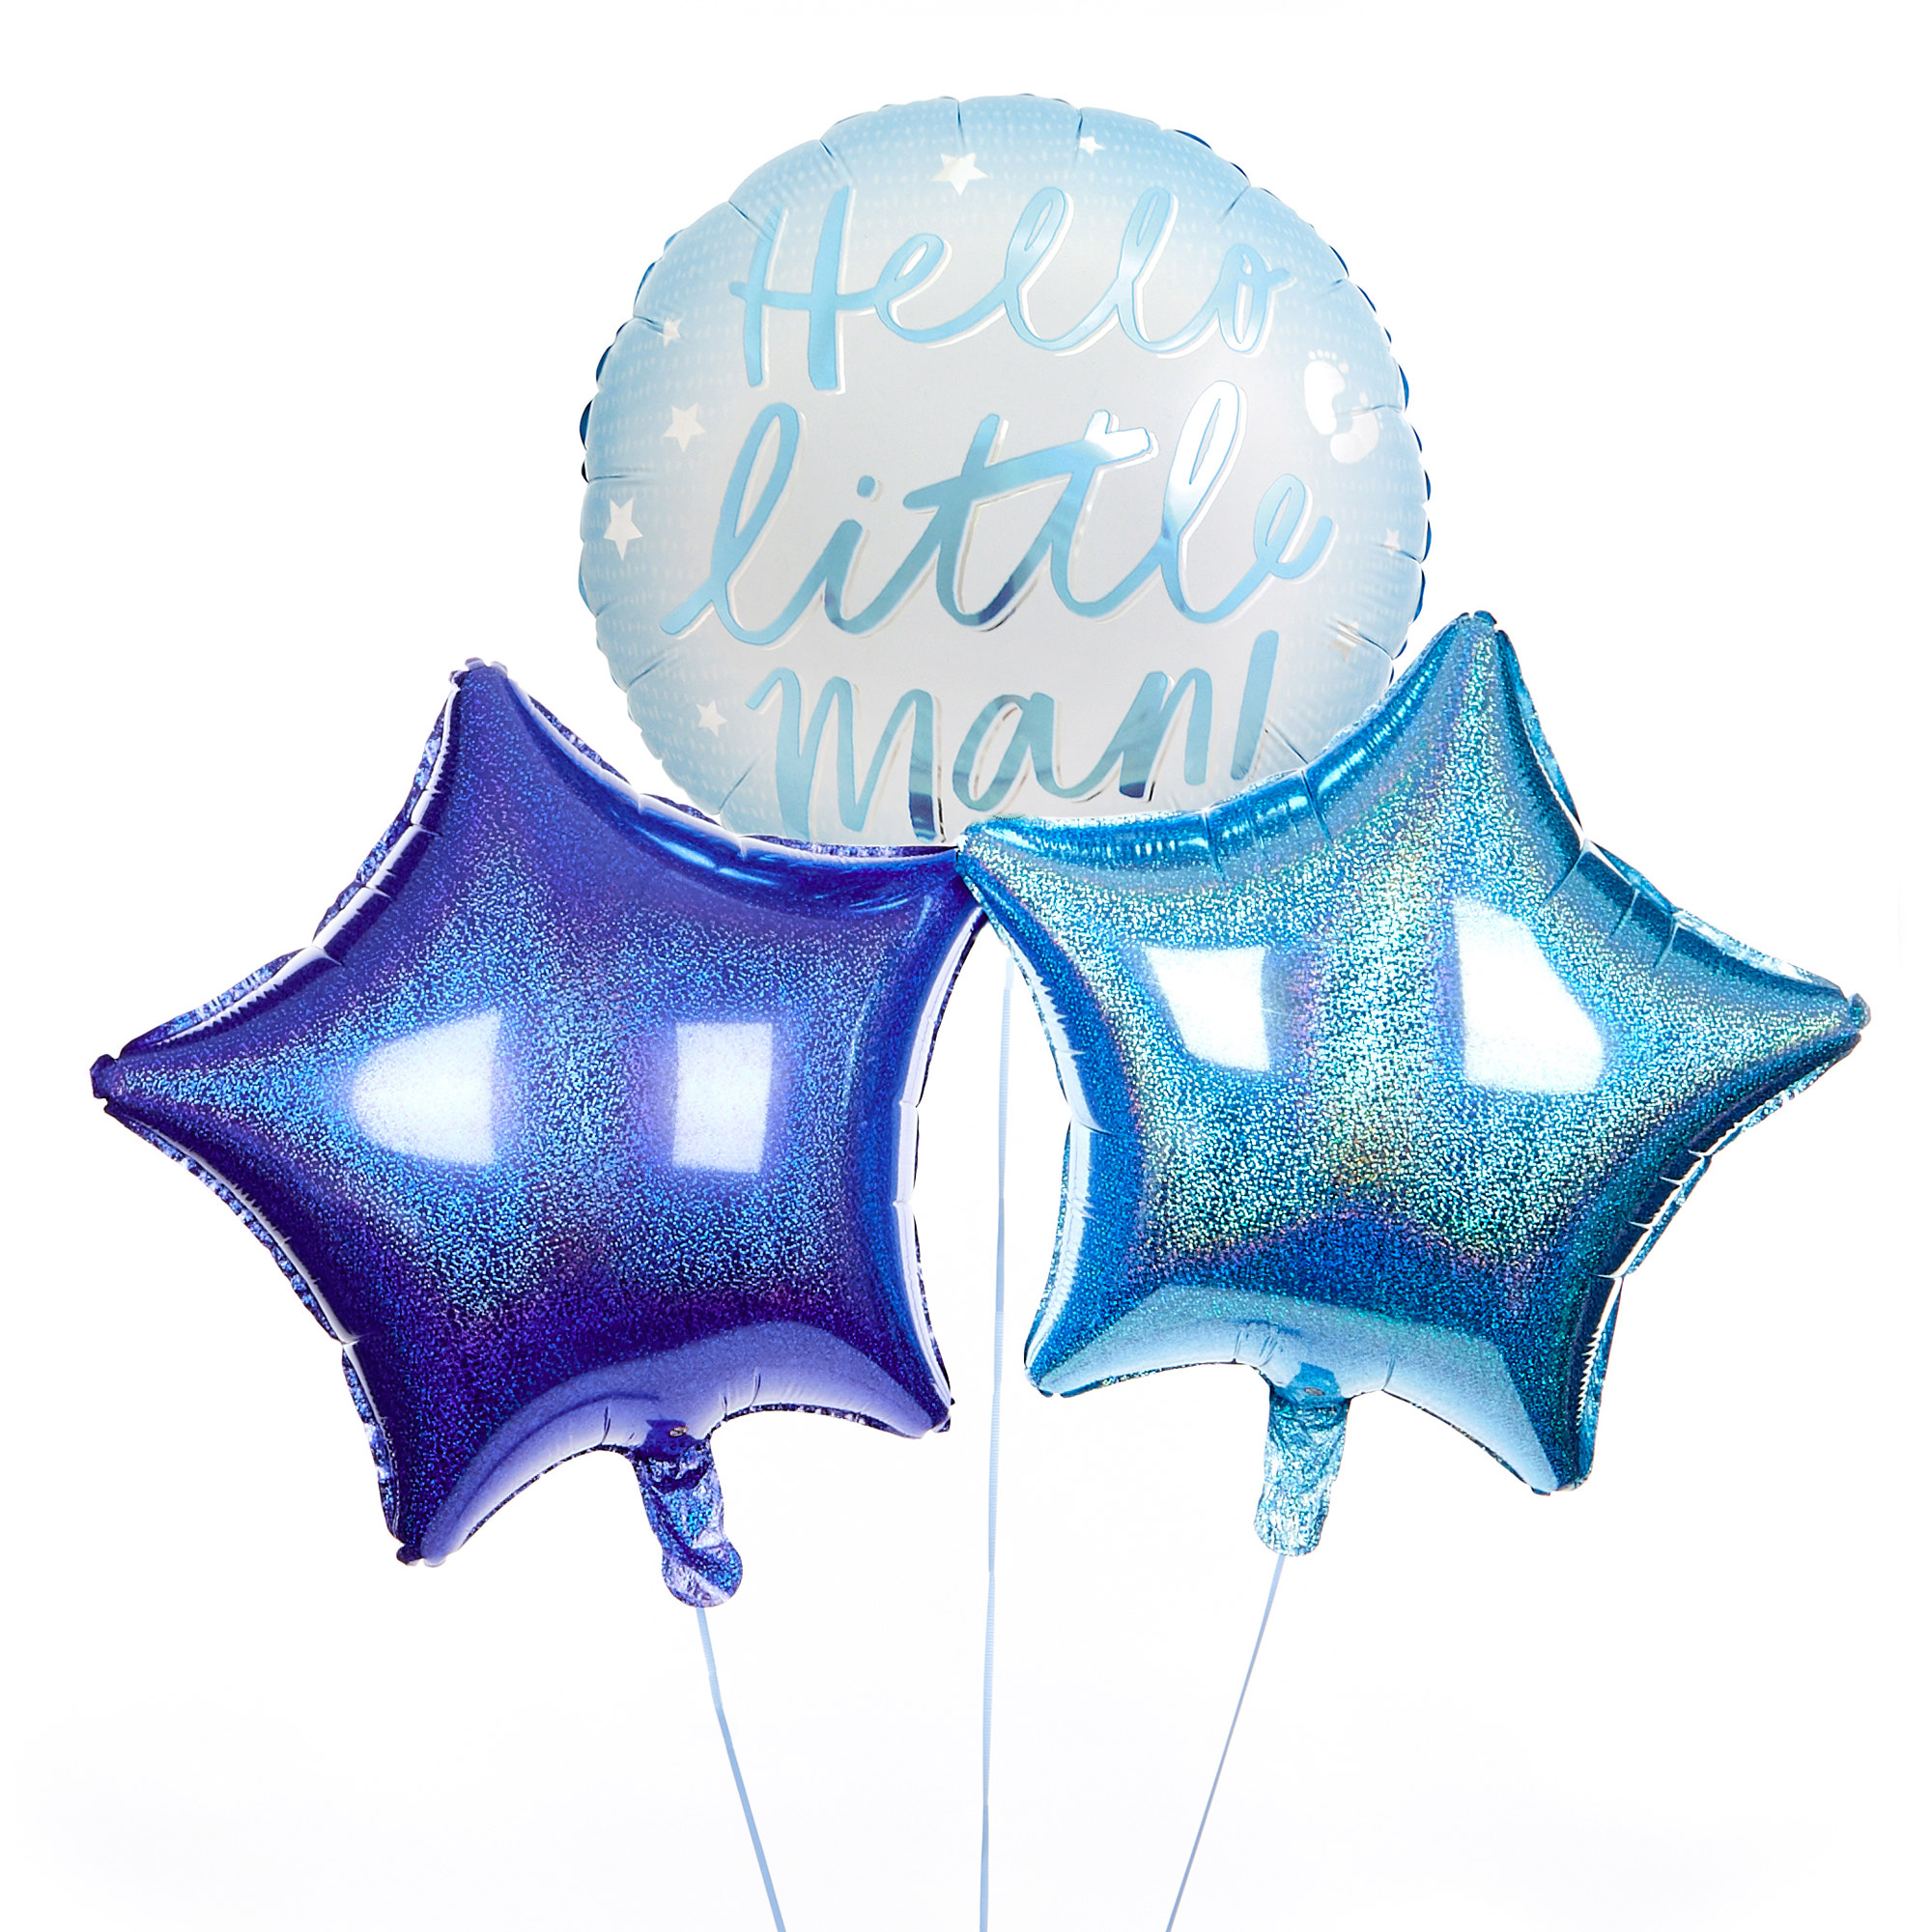 Hello Little Man Balloon Bouquet - DELIVERED INFLATED!